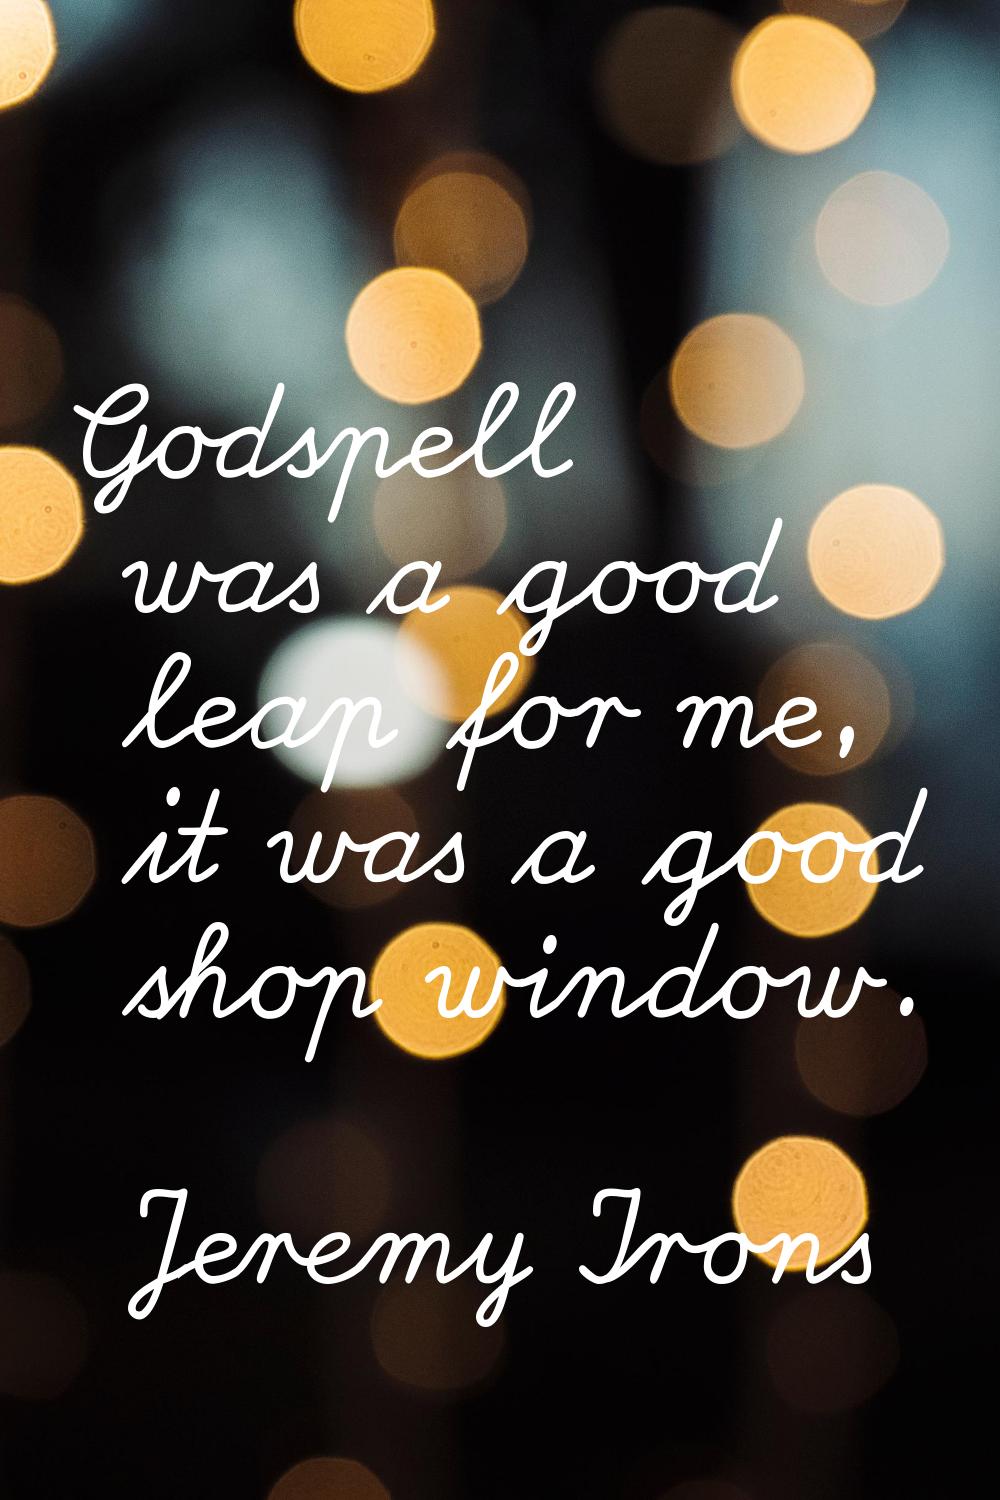 Godspell was a good leap for me, it was a good shop window.